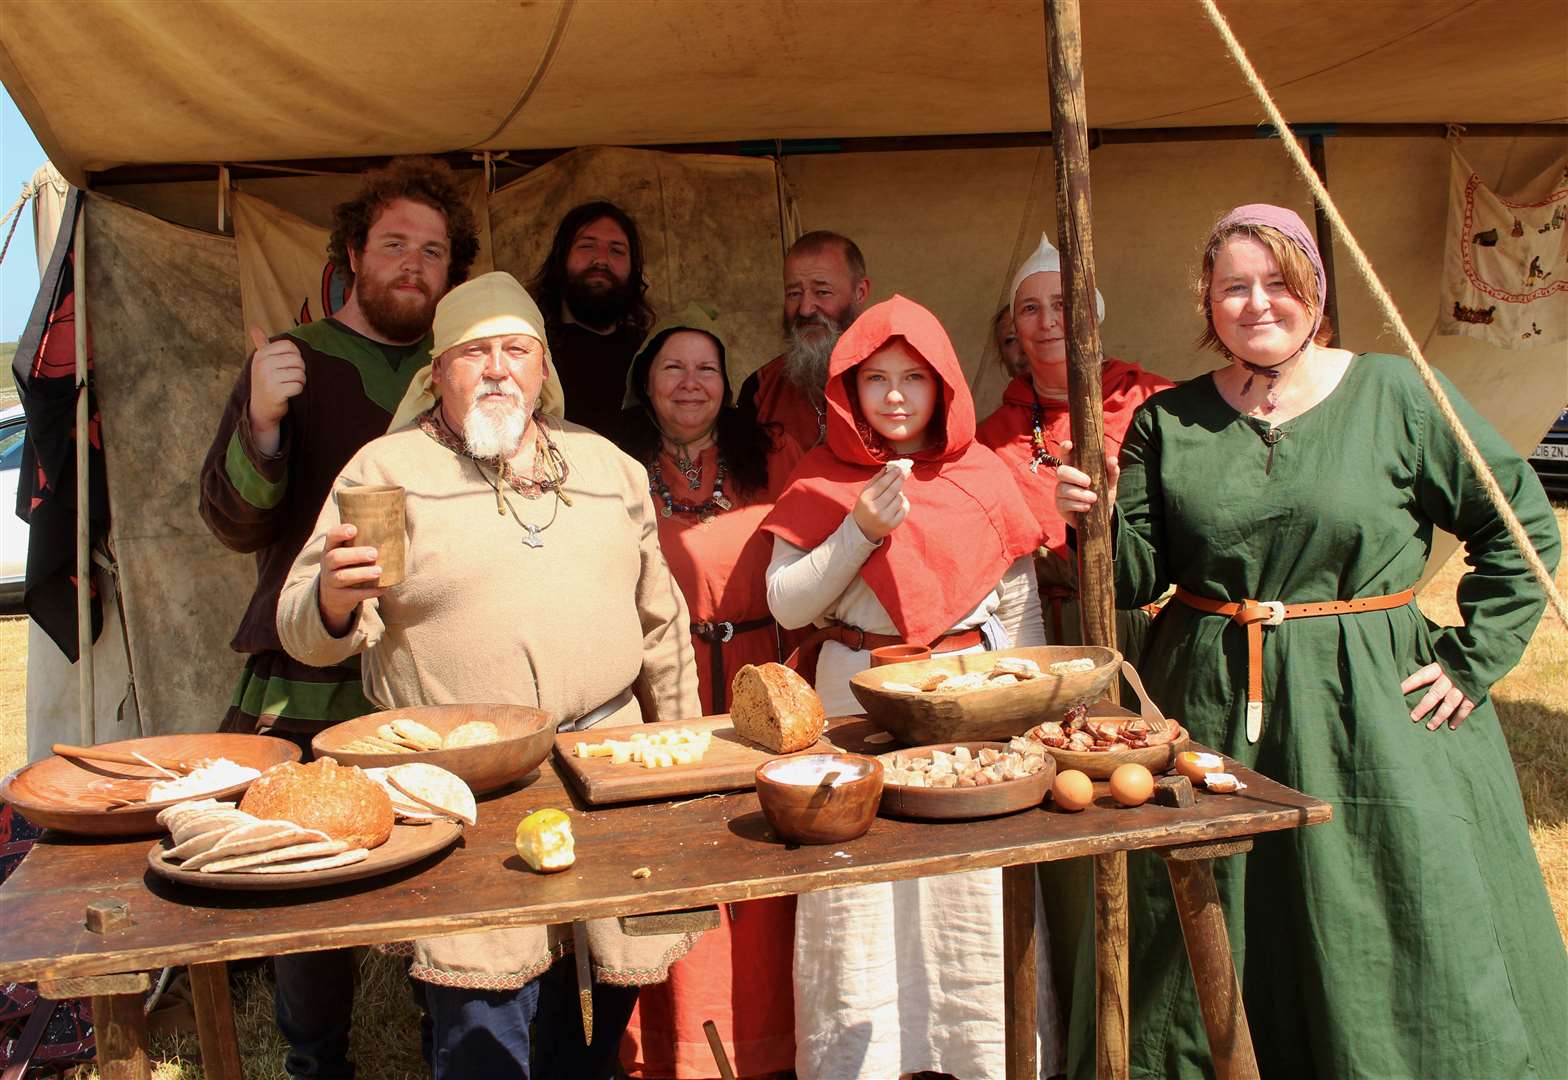 Some of the Glasgow Vikings at their encampment during the Latheron Show. Picture: Alan Hendry